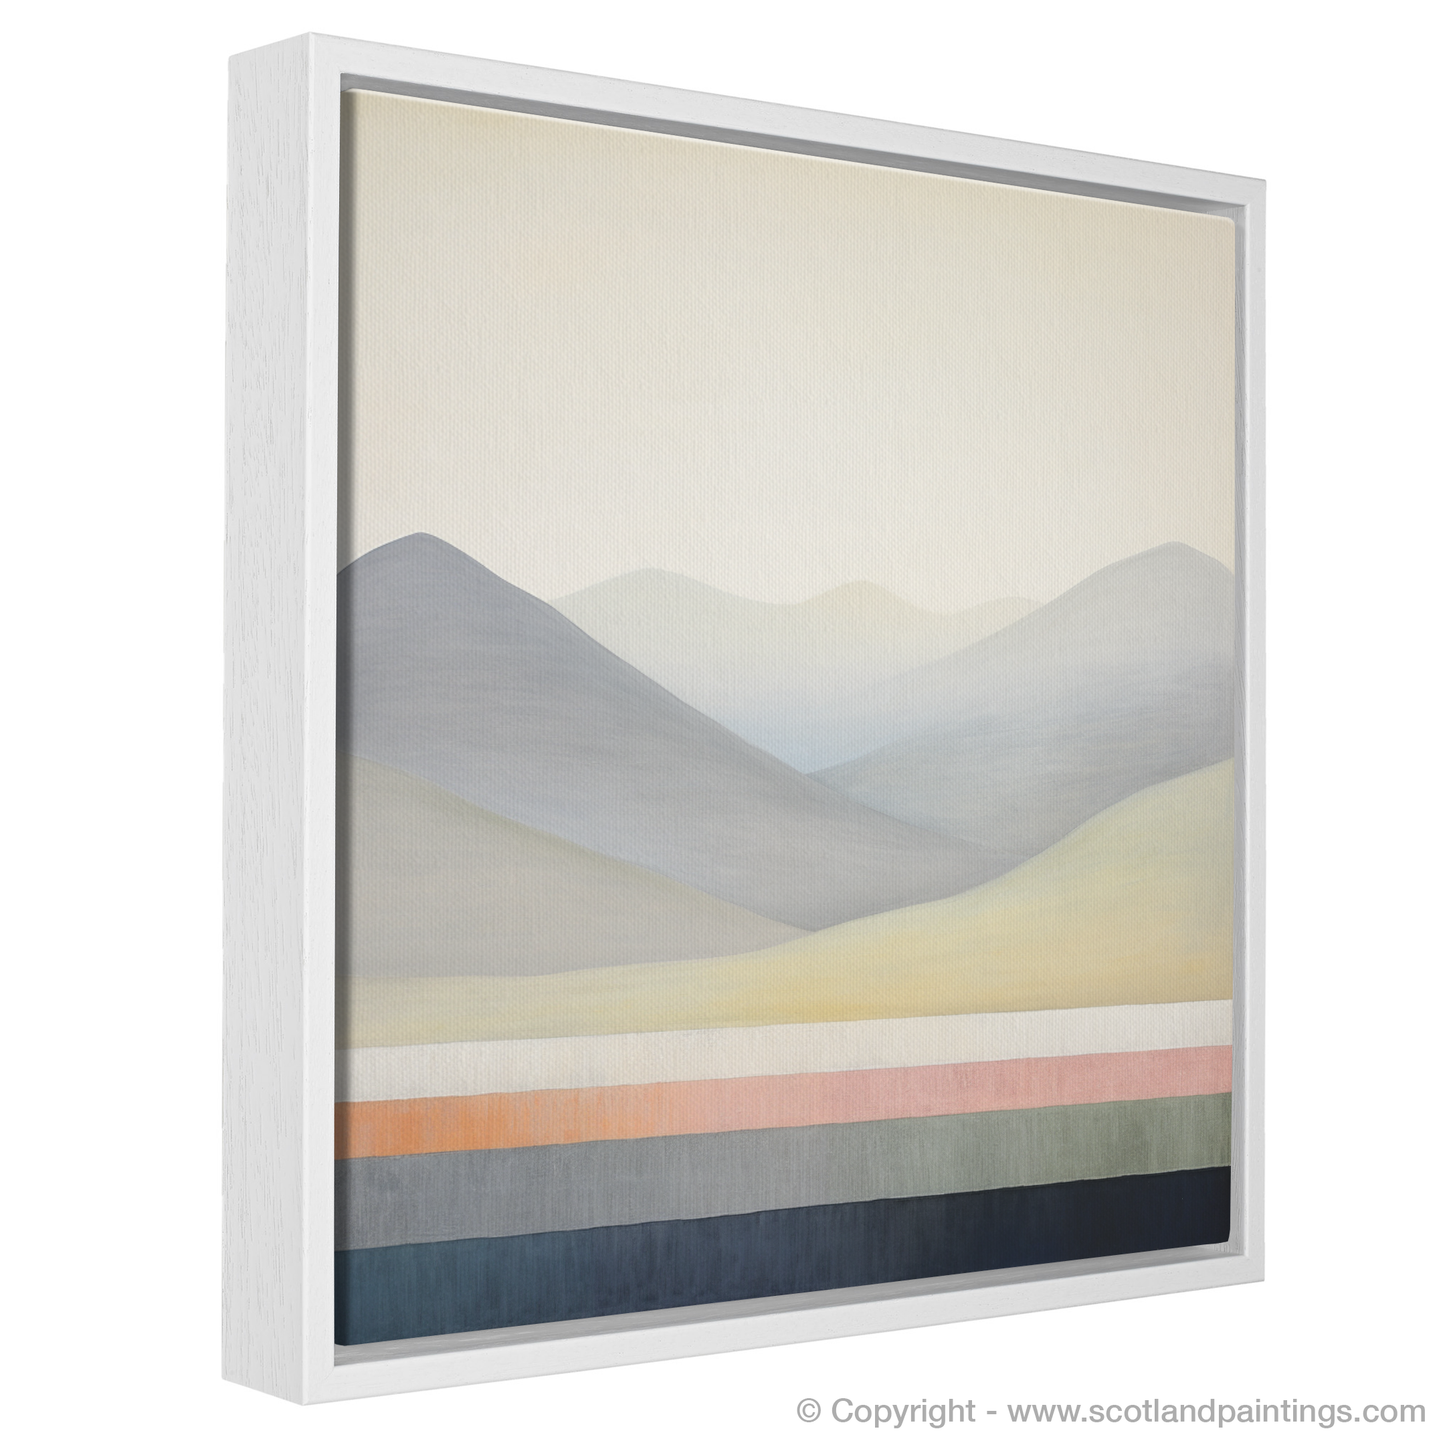 Painting and Art Print of The Cairnwell entitled "Abstract Cairnwell: An Artistic Tribute to Scotland's Highland Majesty".